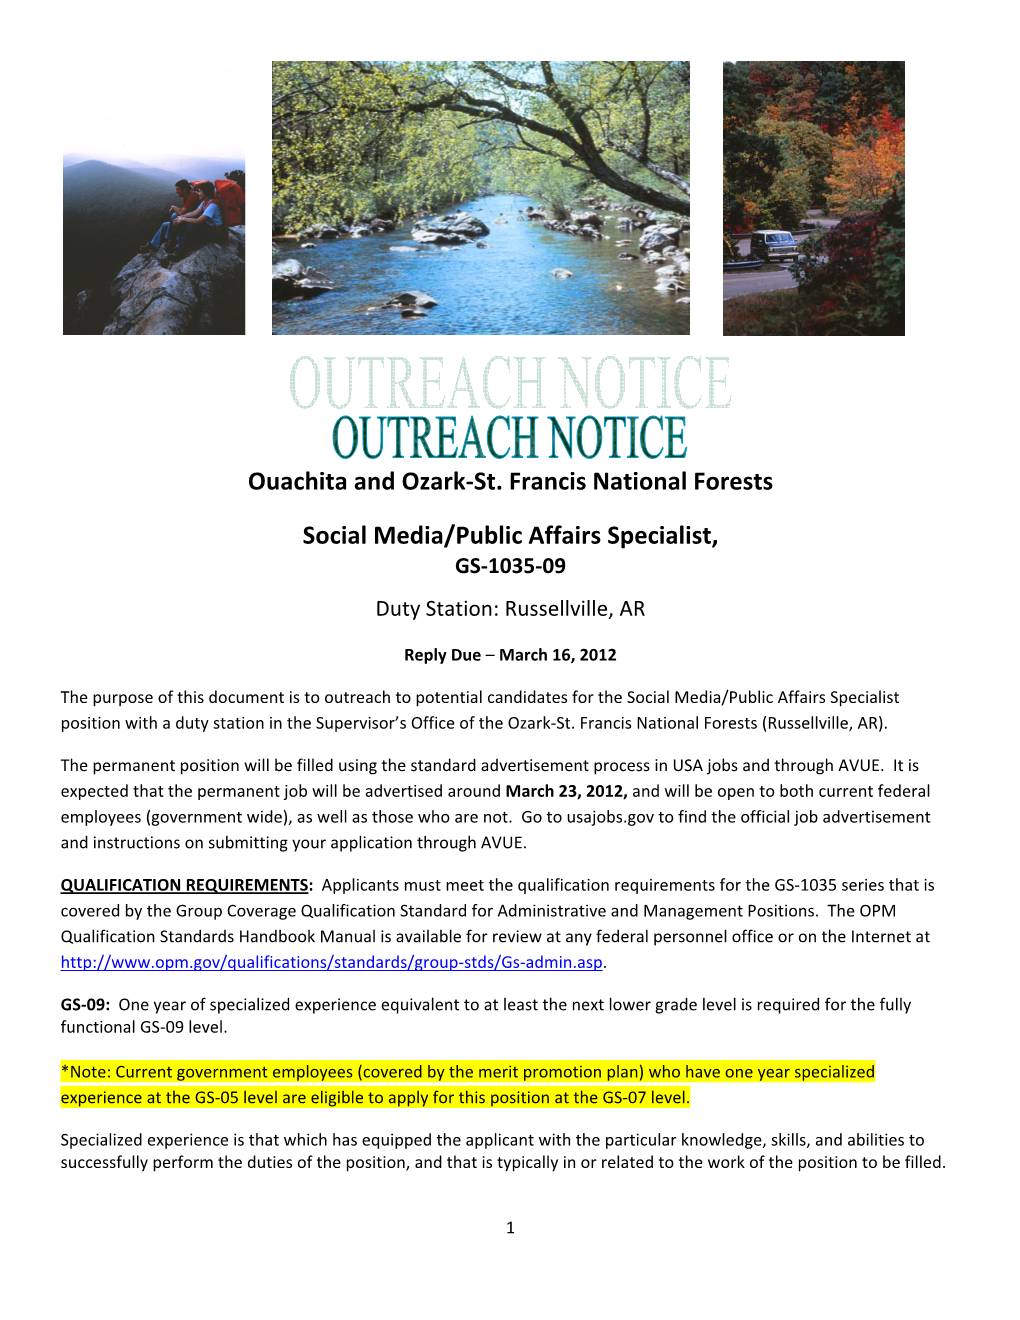 Ouachita and Ozark-St. Francis National Forests Reply Due March 16, 2012